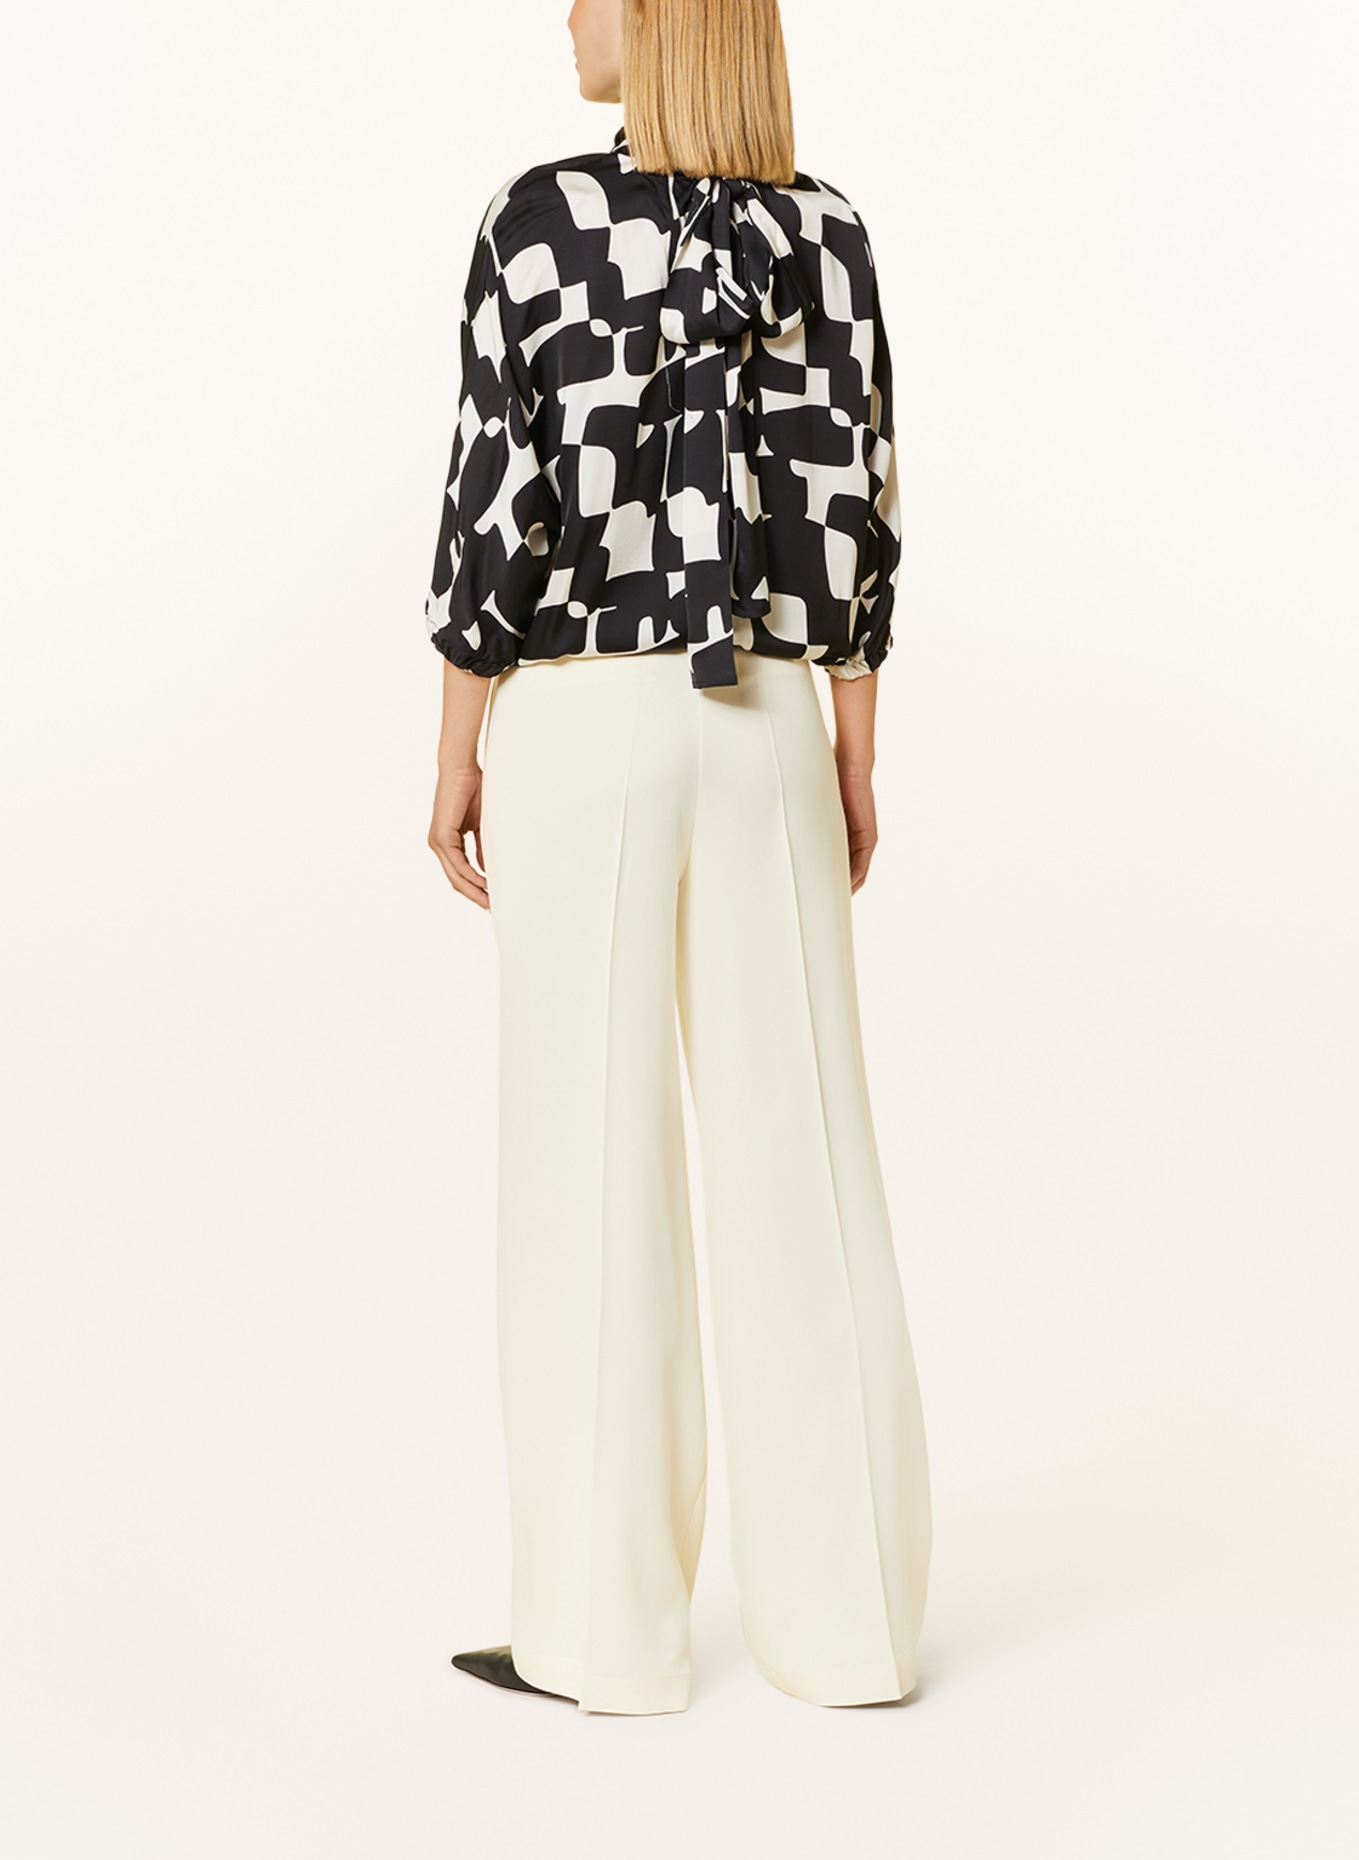 TONNO & PANNA Bow-tie blouse in satin with 3/4 sleeves, Color: BLACK/ WHITE (Image 3)